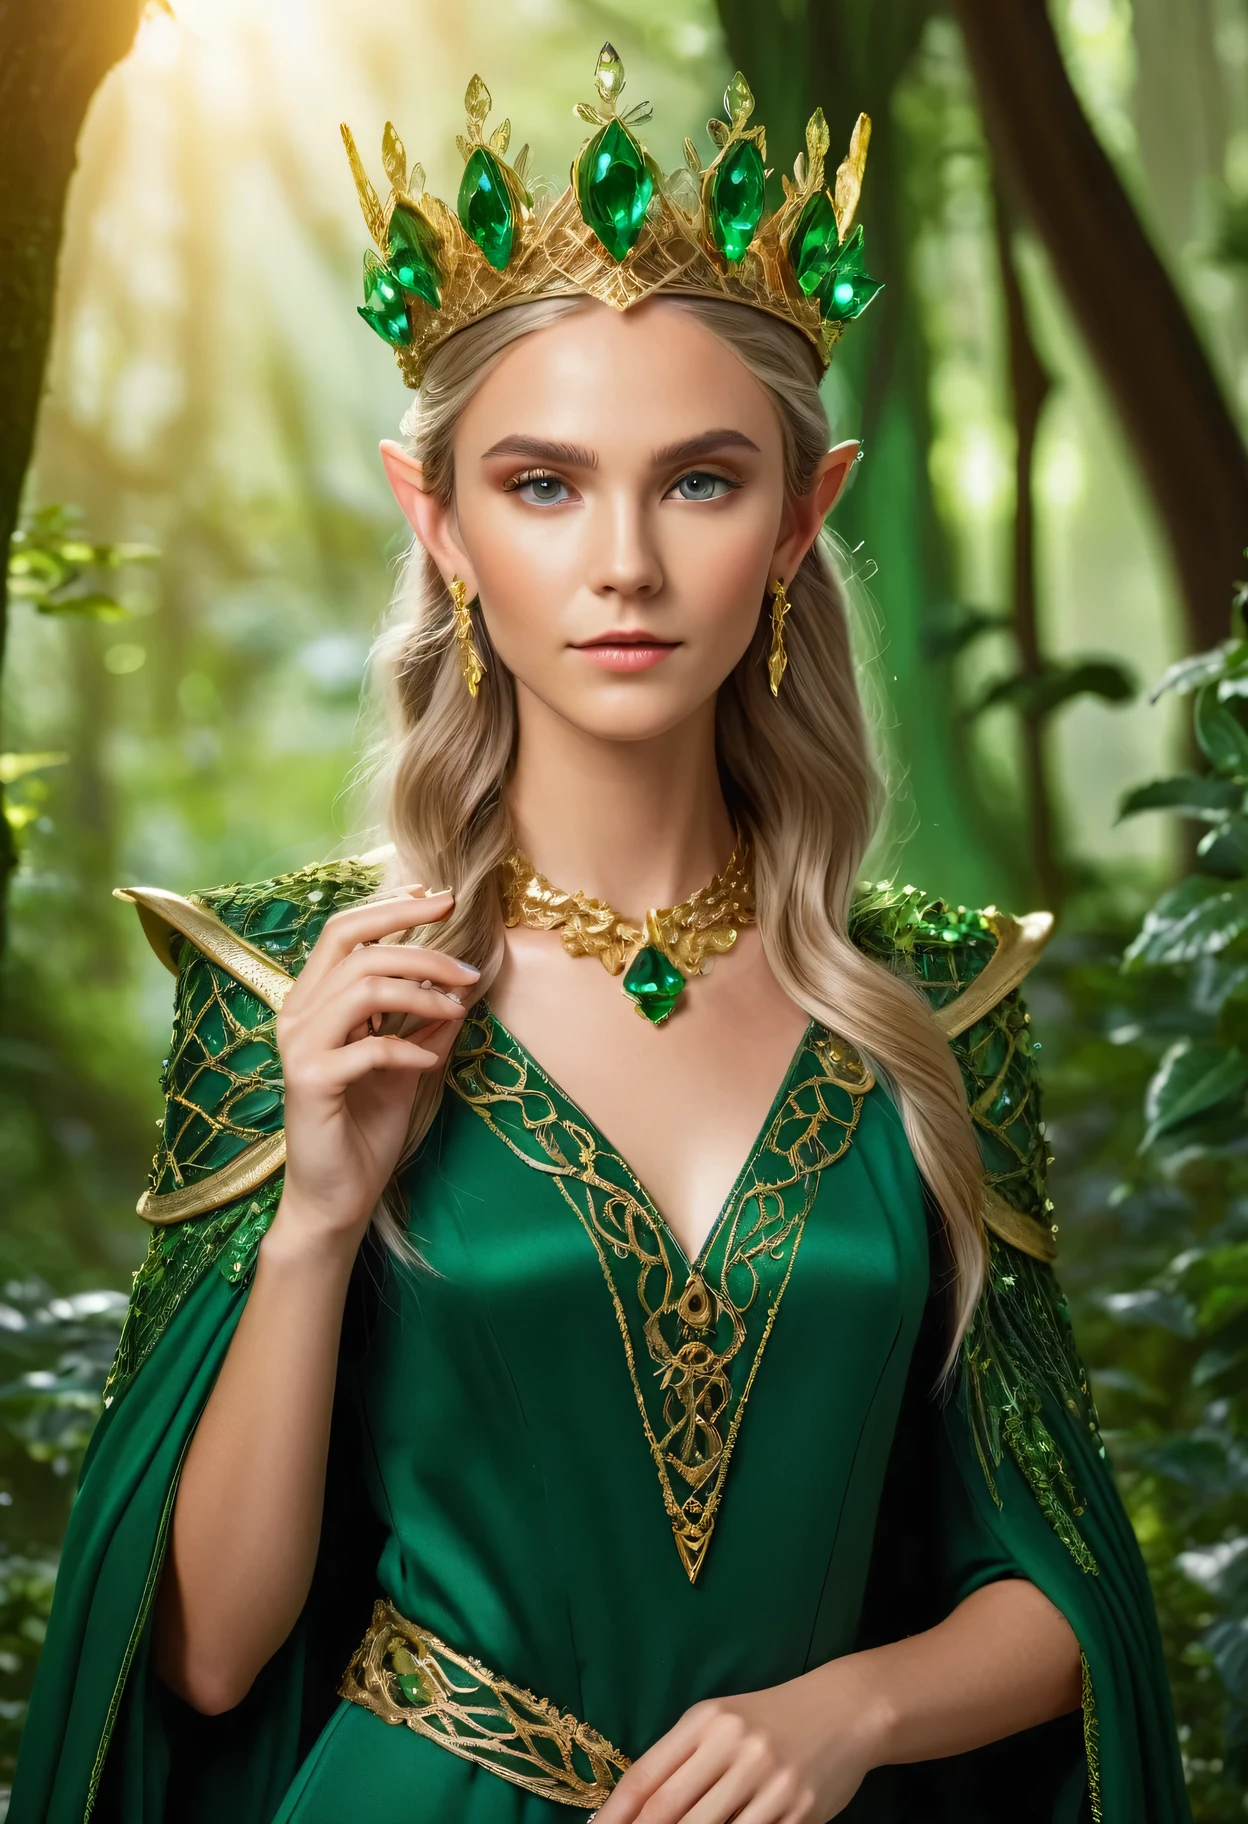 ProFessional photography For an elite magazine, the ElF Queen in chic Forest elF clothes with intricate green painting, on her head an elegant crown made oF an intricate weave oF golden threads, the ElF Queen poses, in her hand a crystal crystal glowing green From inside, the ElF Queen looks at the viewer, Full pose, Full body, worthy pose oF a queen, 眨眼, 相机佳能 EOS R5 搭配佳能 RF 镜头 100-500mm F4.5-7.1L 是 USM, 500 毫米, 1/500 秒., F/7.1 和 ISO 1000.